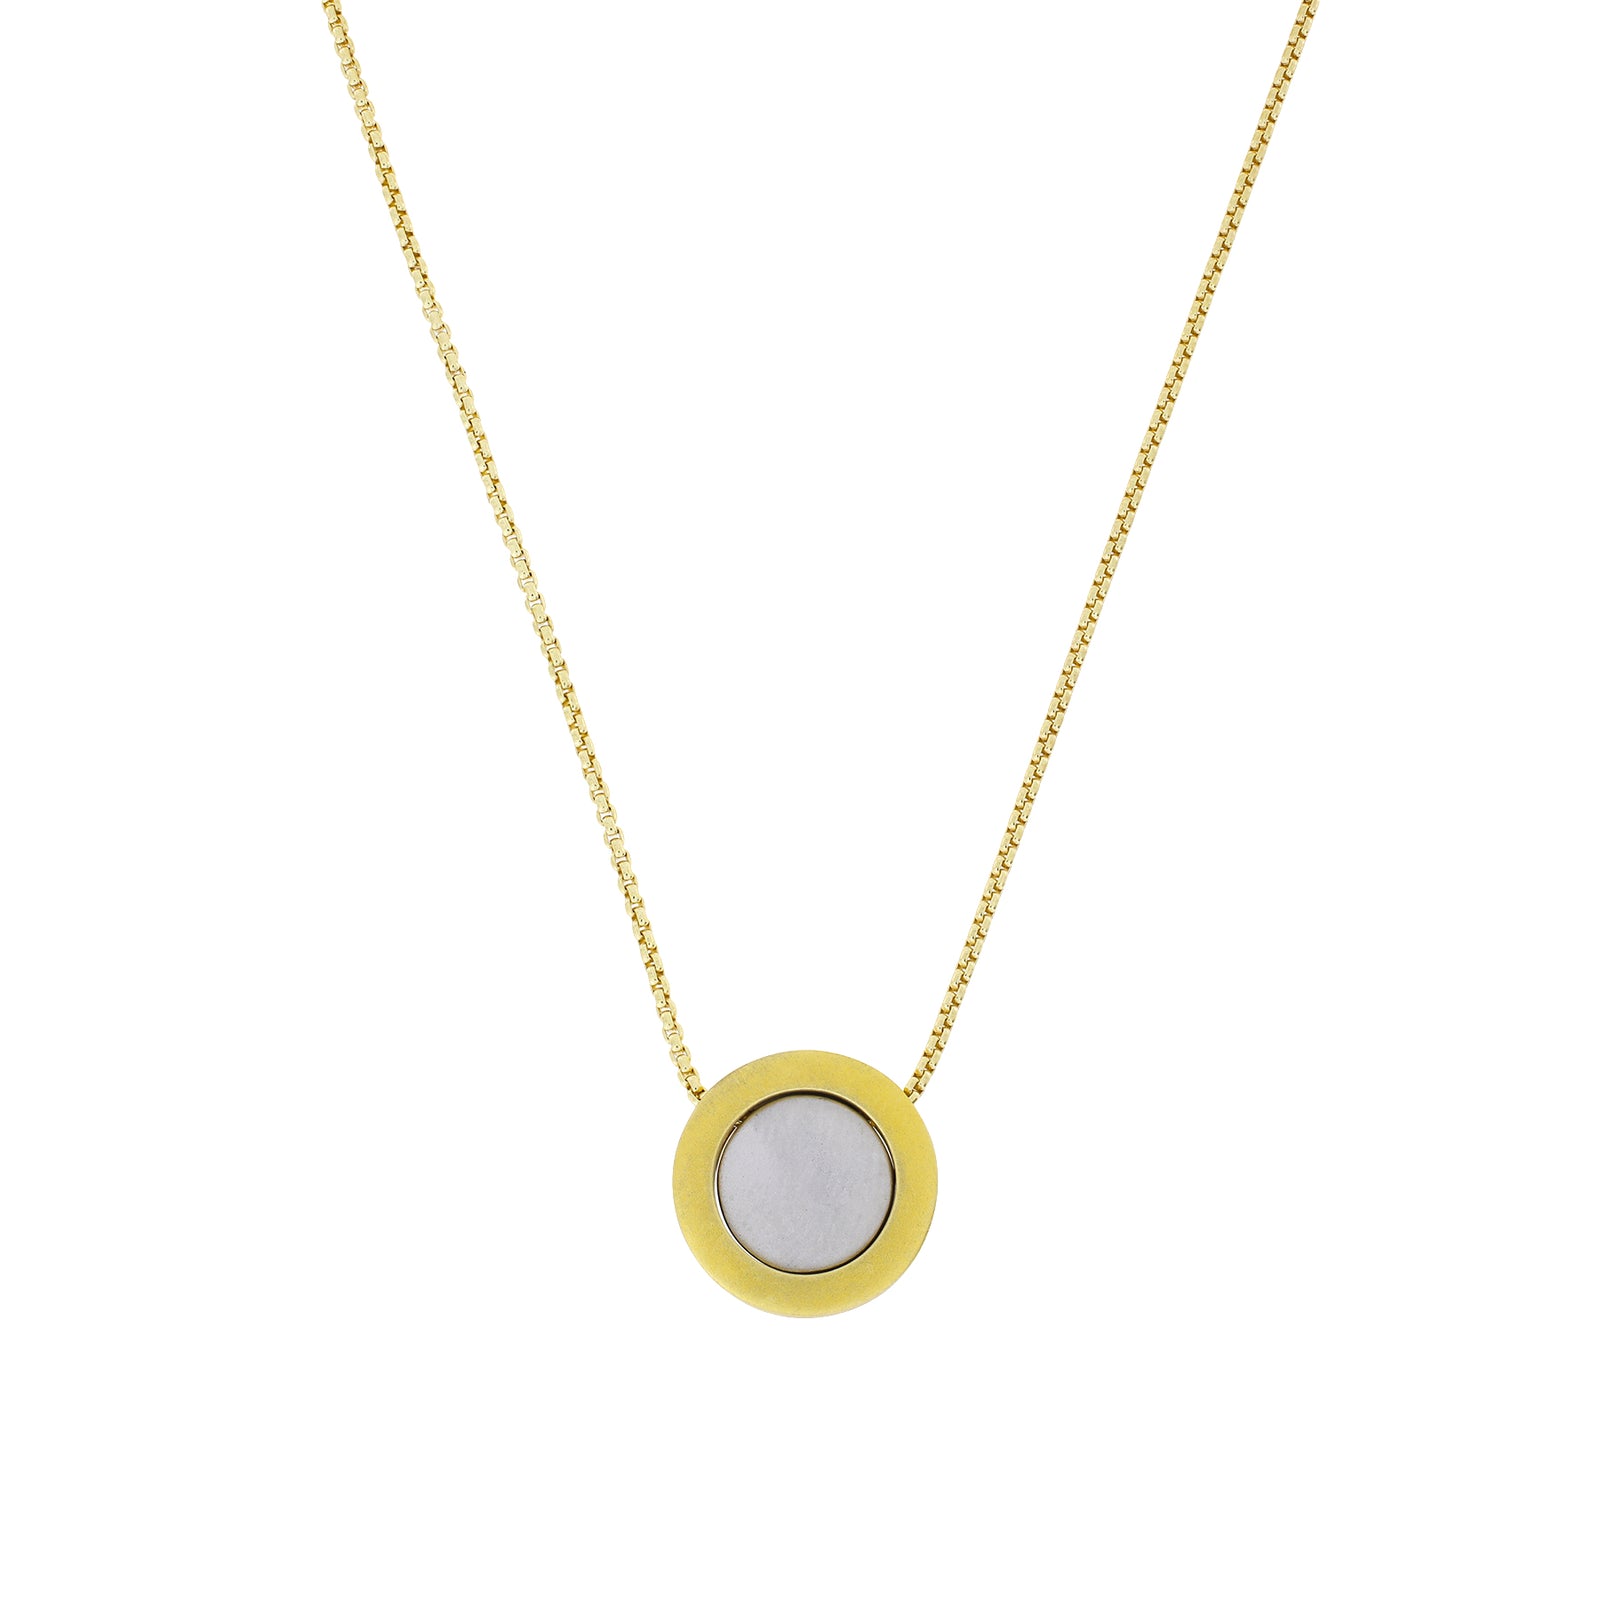 EMBRACE SILVER CIRCLE & GOLD HALO NECKLACE